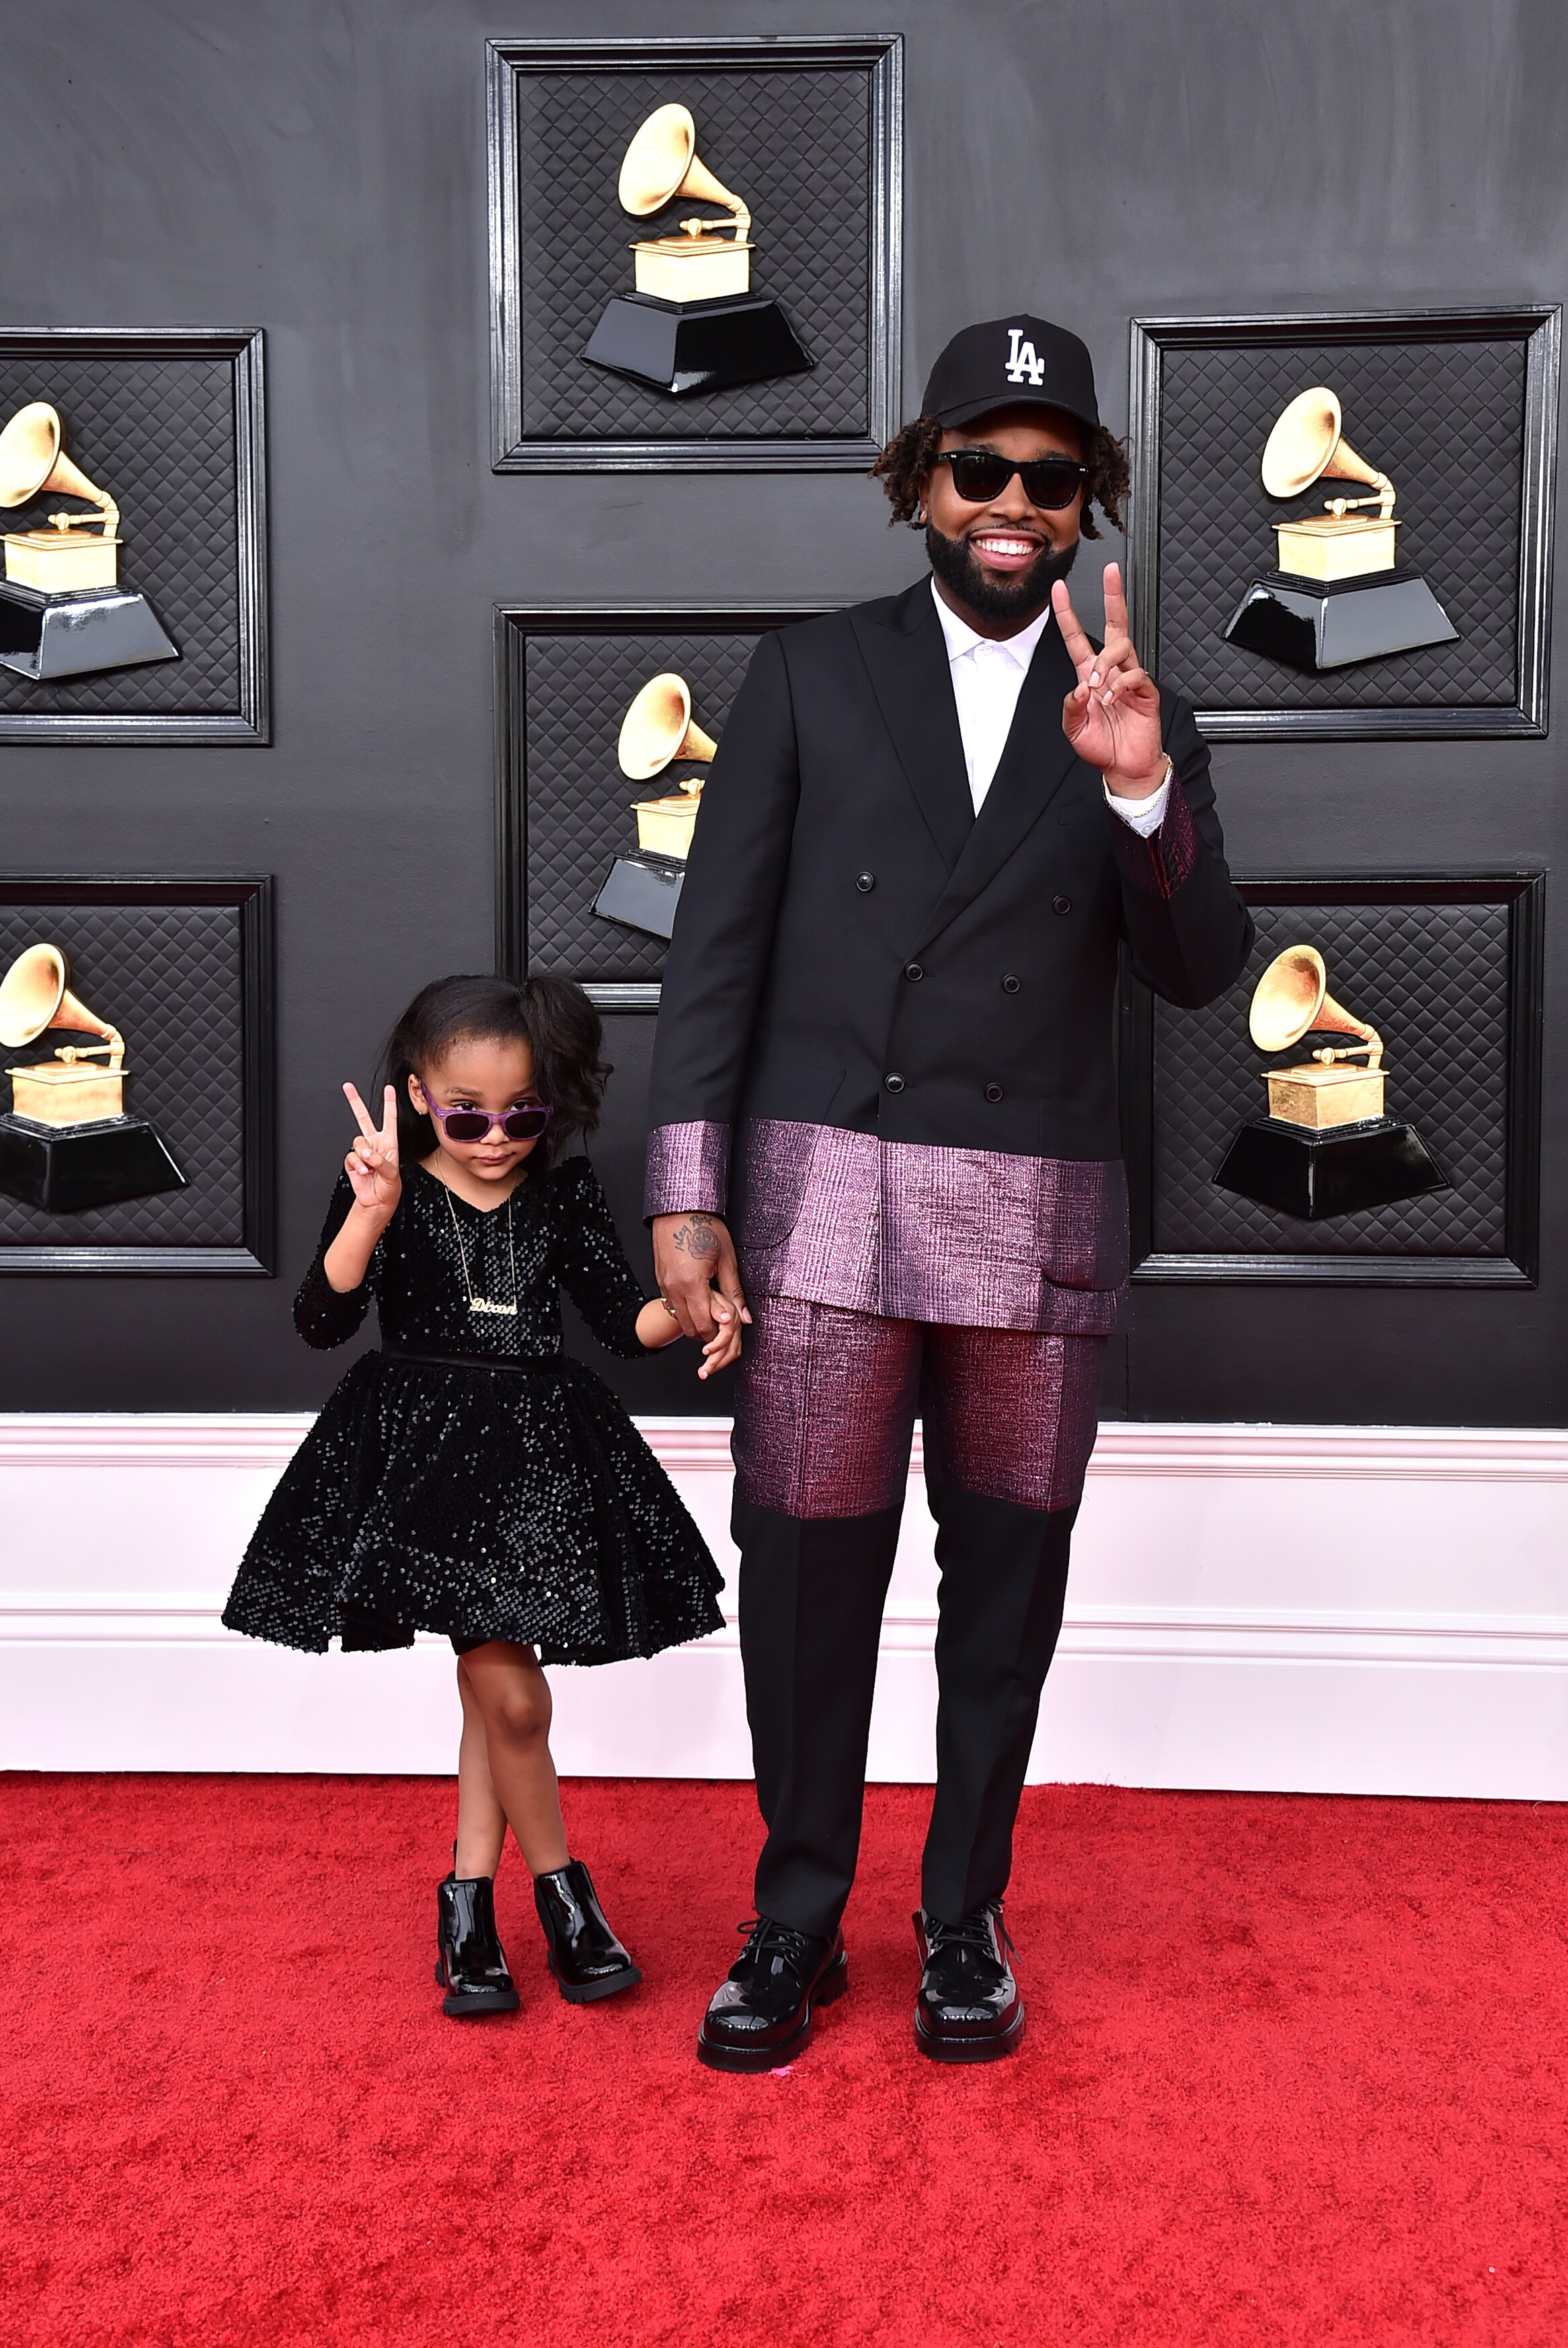 kenyon dixon with his young daughter on the red carpet both holding up peace signs with their fingers